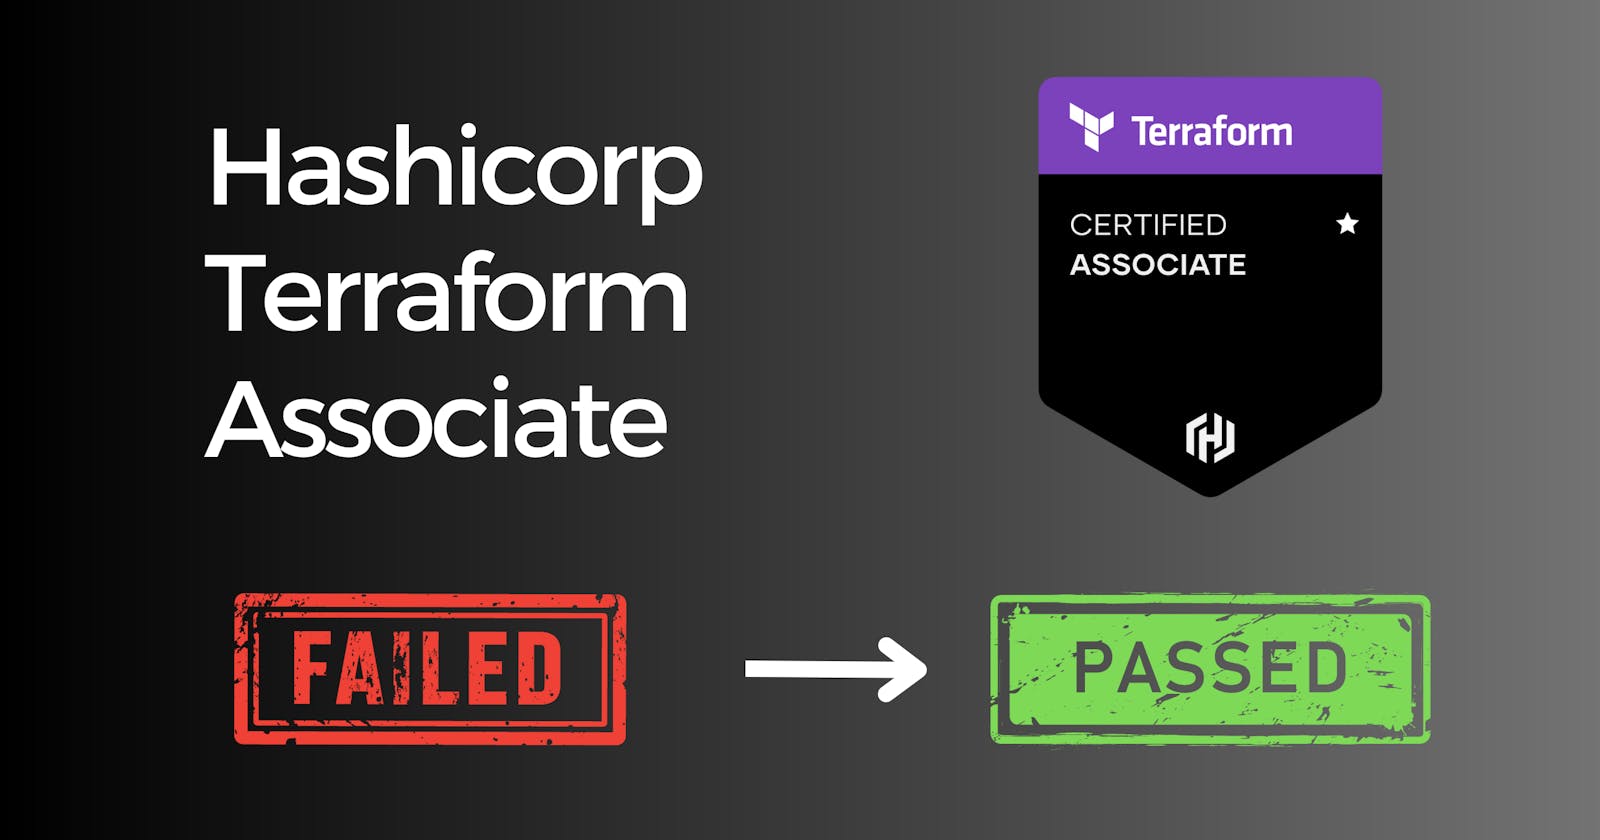 How I passed the Terraform Associate Certificate after failing on the first attempt